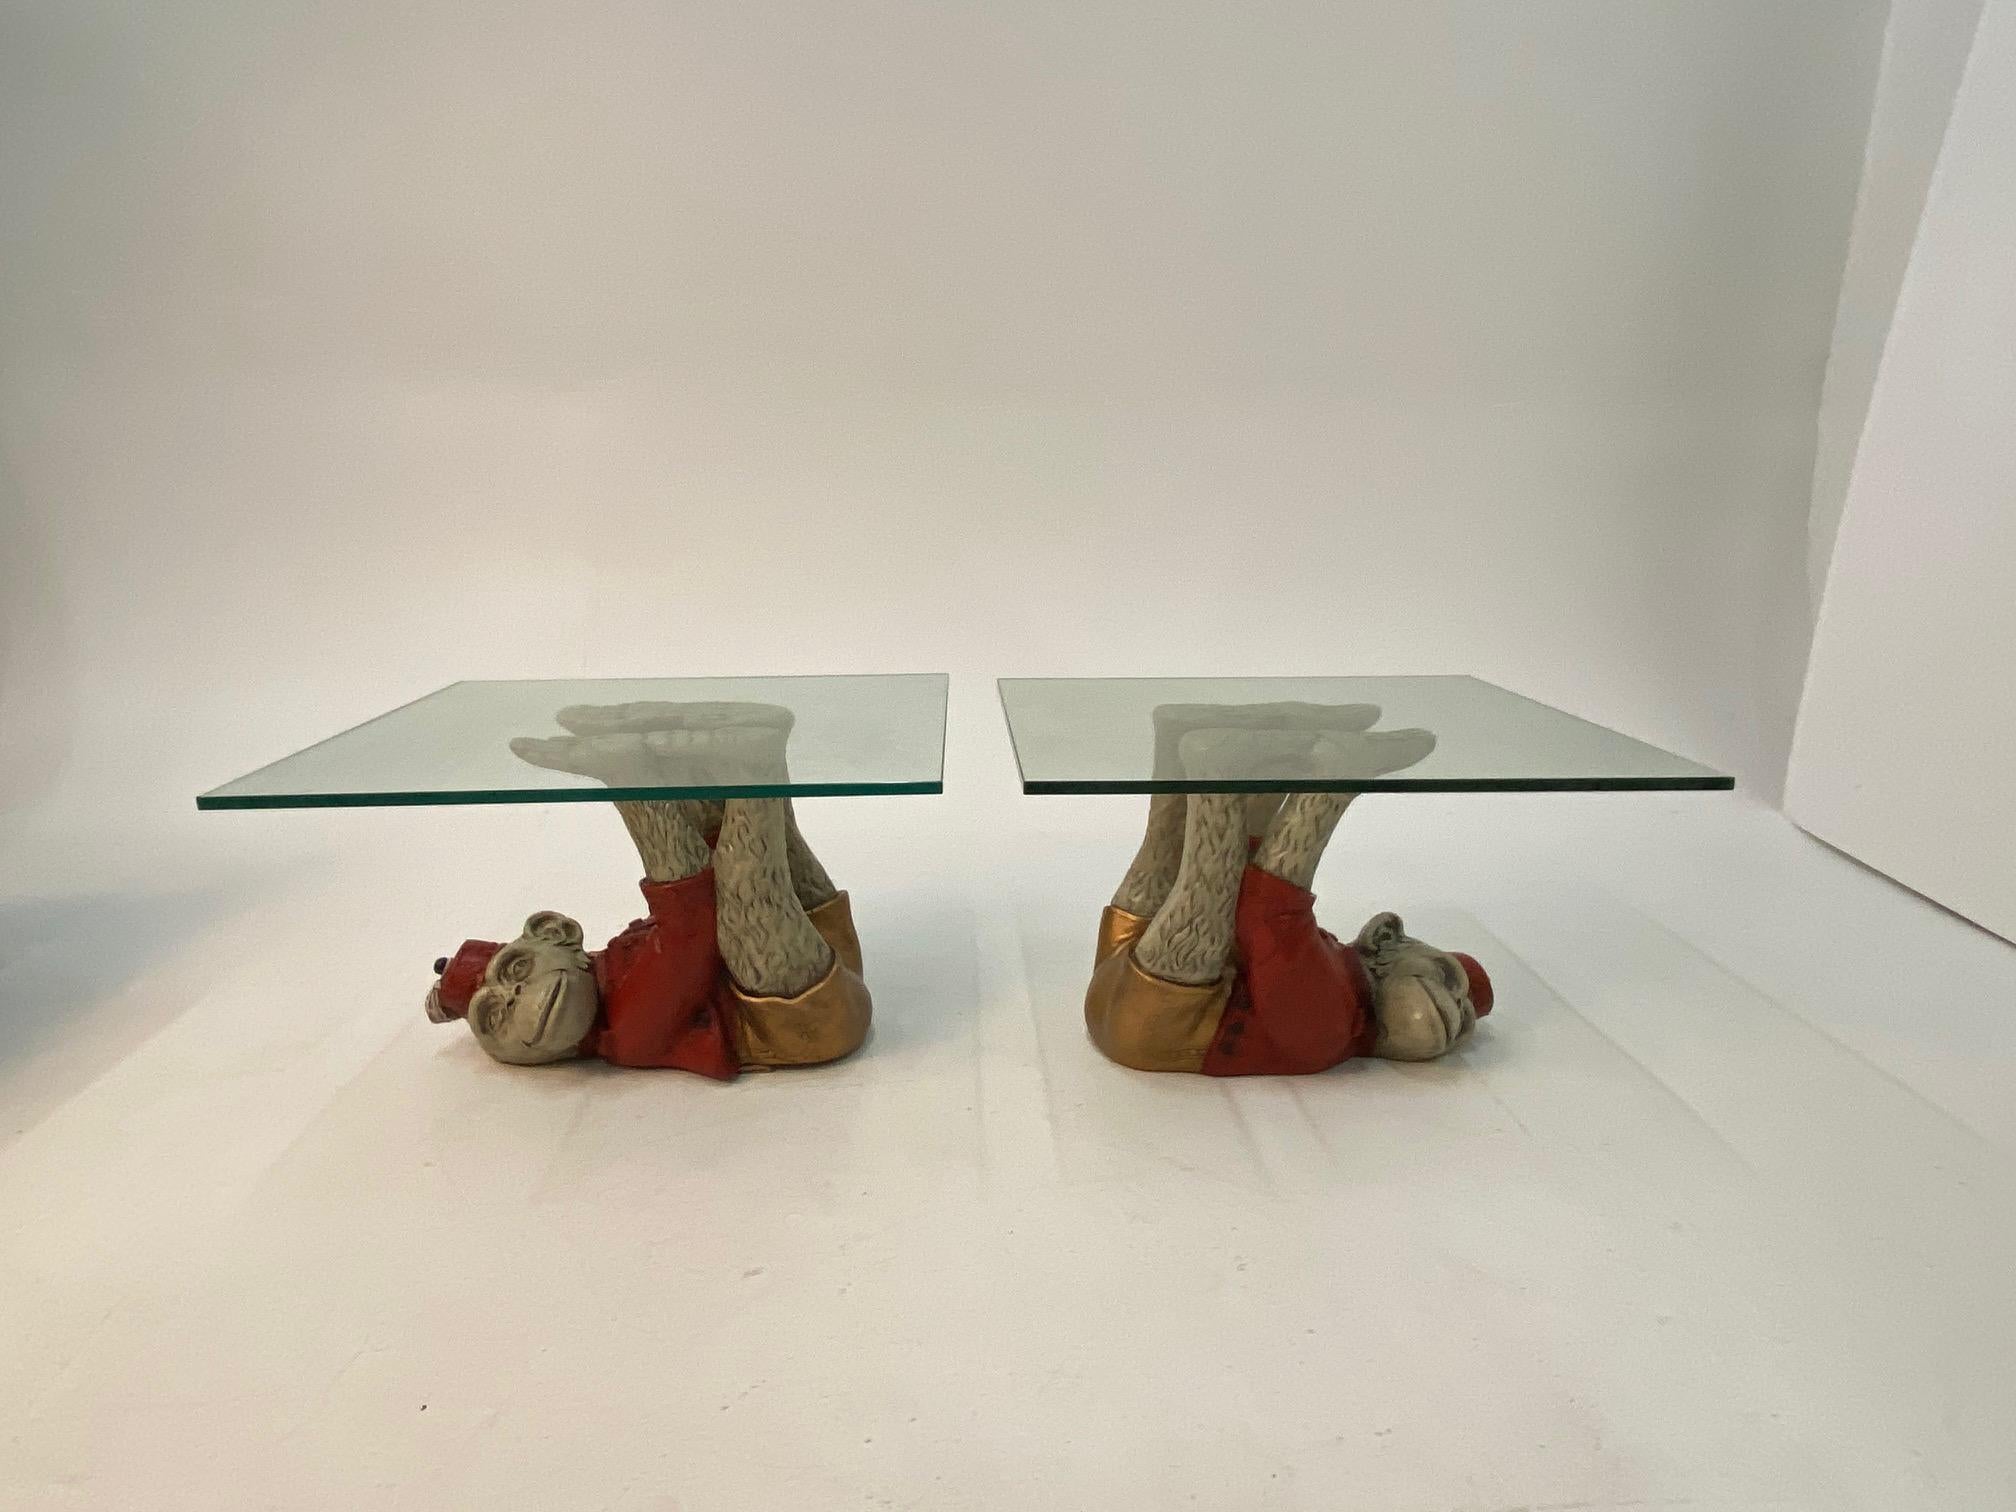 Show stoppingly fun whimsical pair of vintage monkey motife end tables having cast plaster painted apes dressed in red bellhop outfits lying in fantastic acrobatic positions on their backs, with extended arms and legs that support glass table tops.